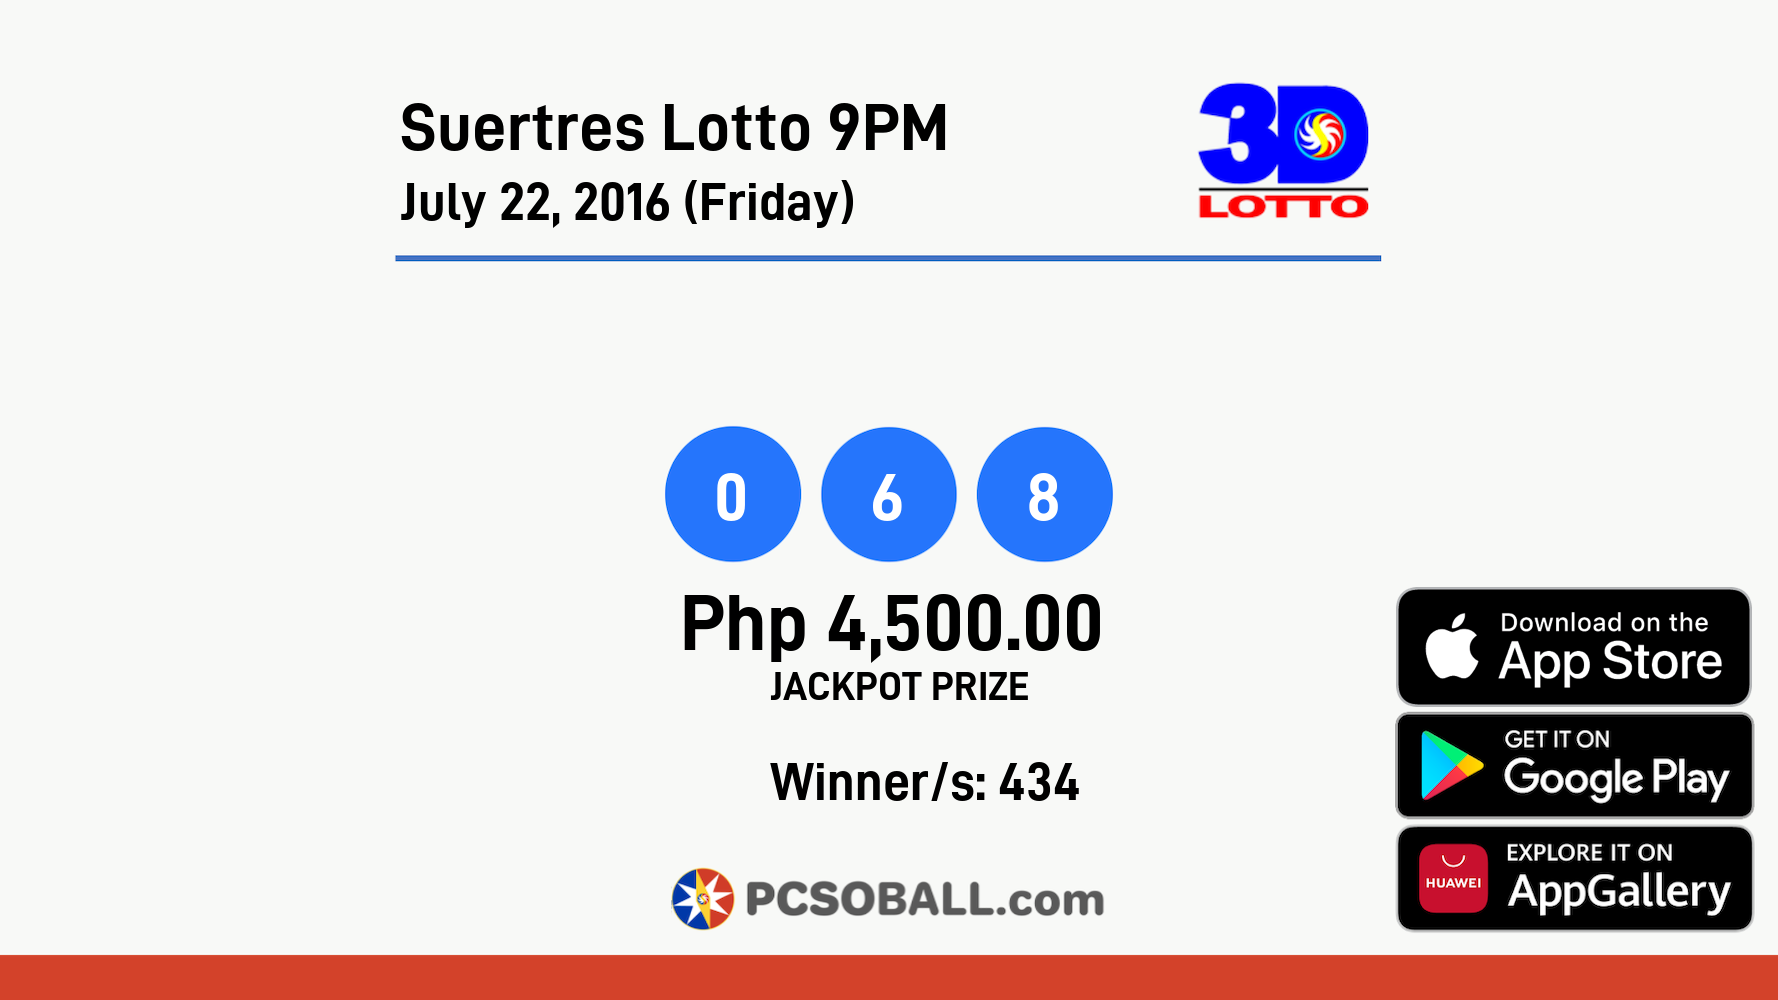 Suertres Lotto 9PM July 22, 2016 (Friday) Result